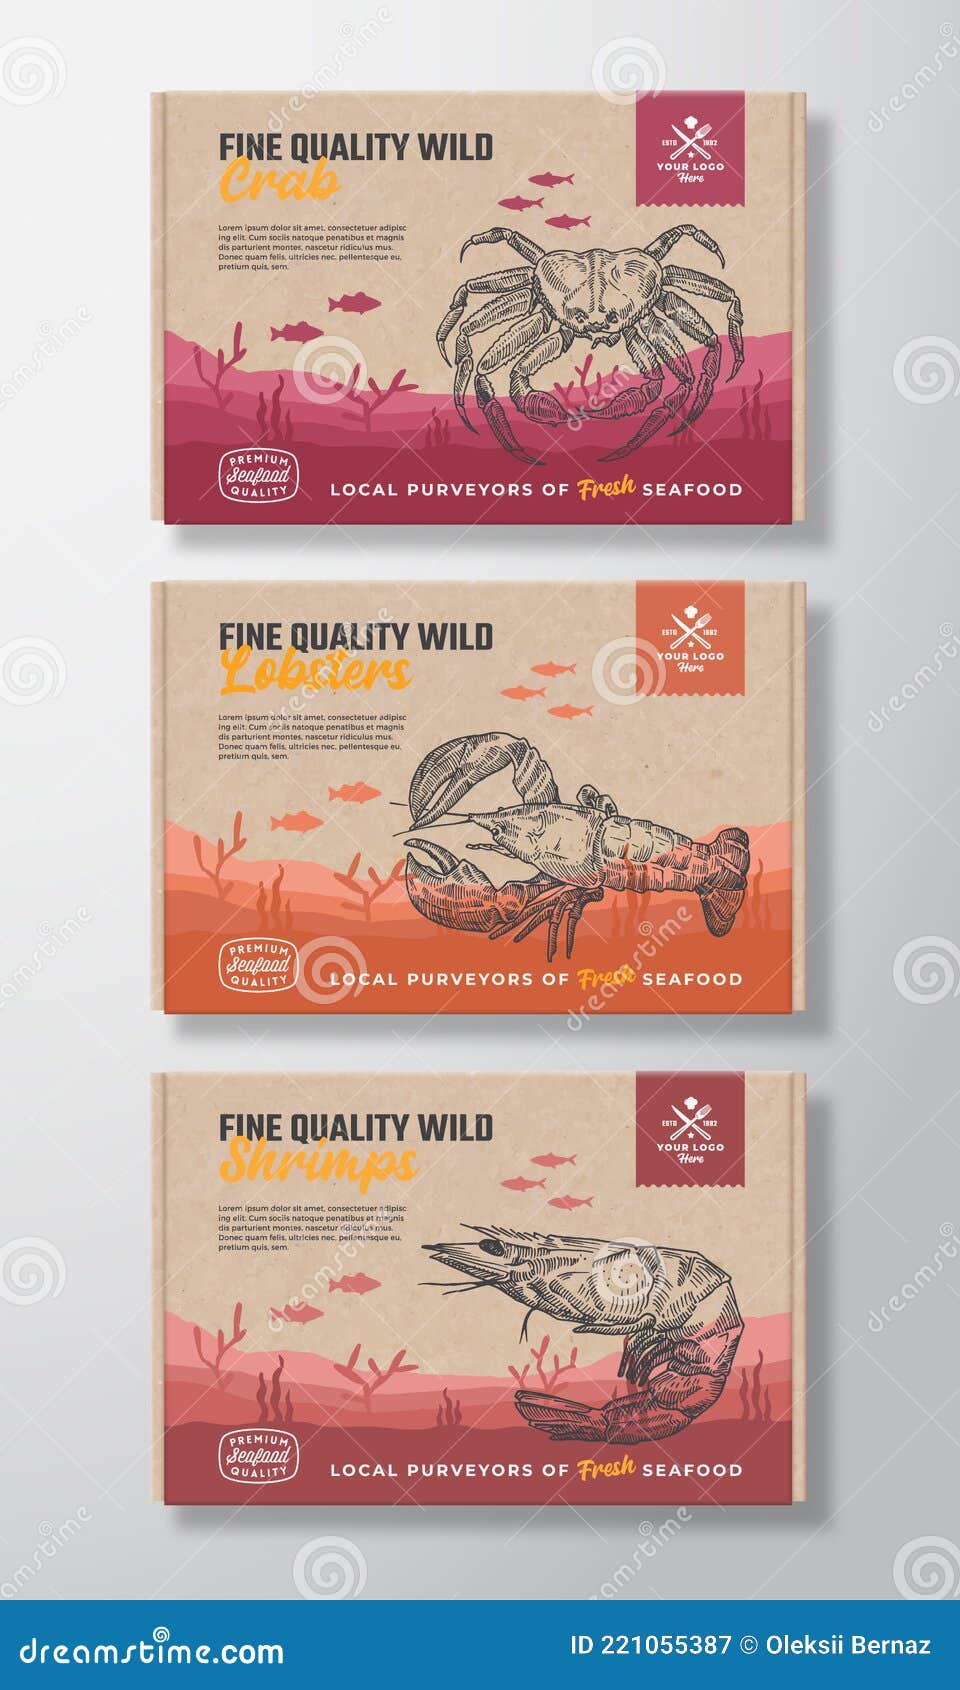 https://thumbs.dreamstime.com/z/premium-quality-food-box-mockups-vector-seafood-packaging-label-design-cardboard-containers-set-hand-drawn-crab-shrimp-221055387.jpg